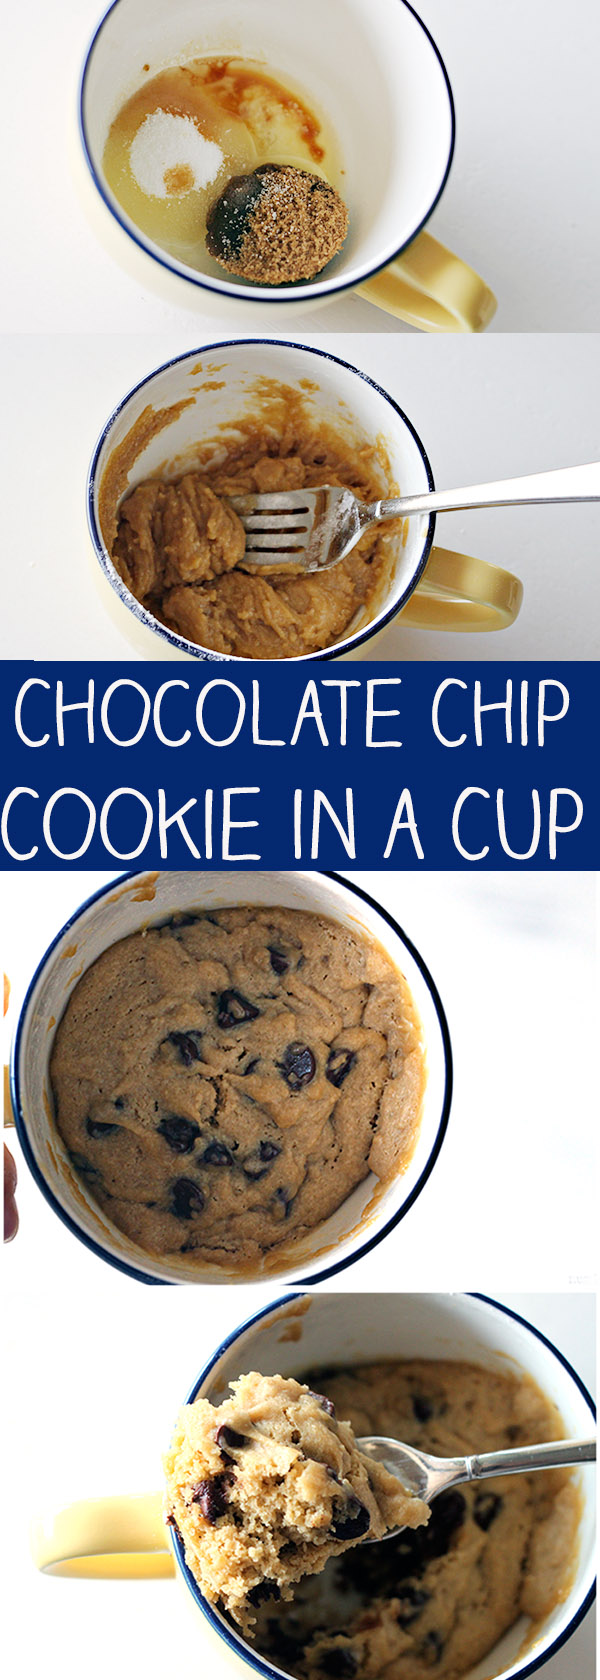 Chocolate Chip Cookie in a Cup - the original easy microwave cookie in a mug recipe! 